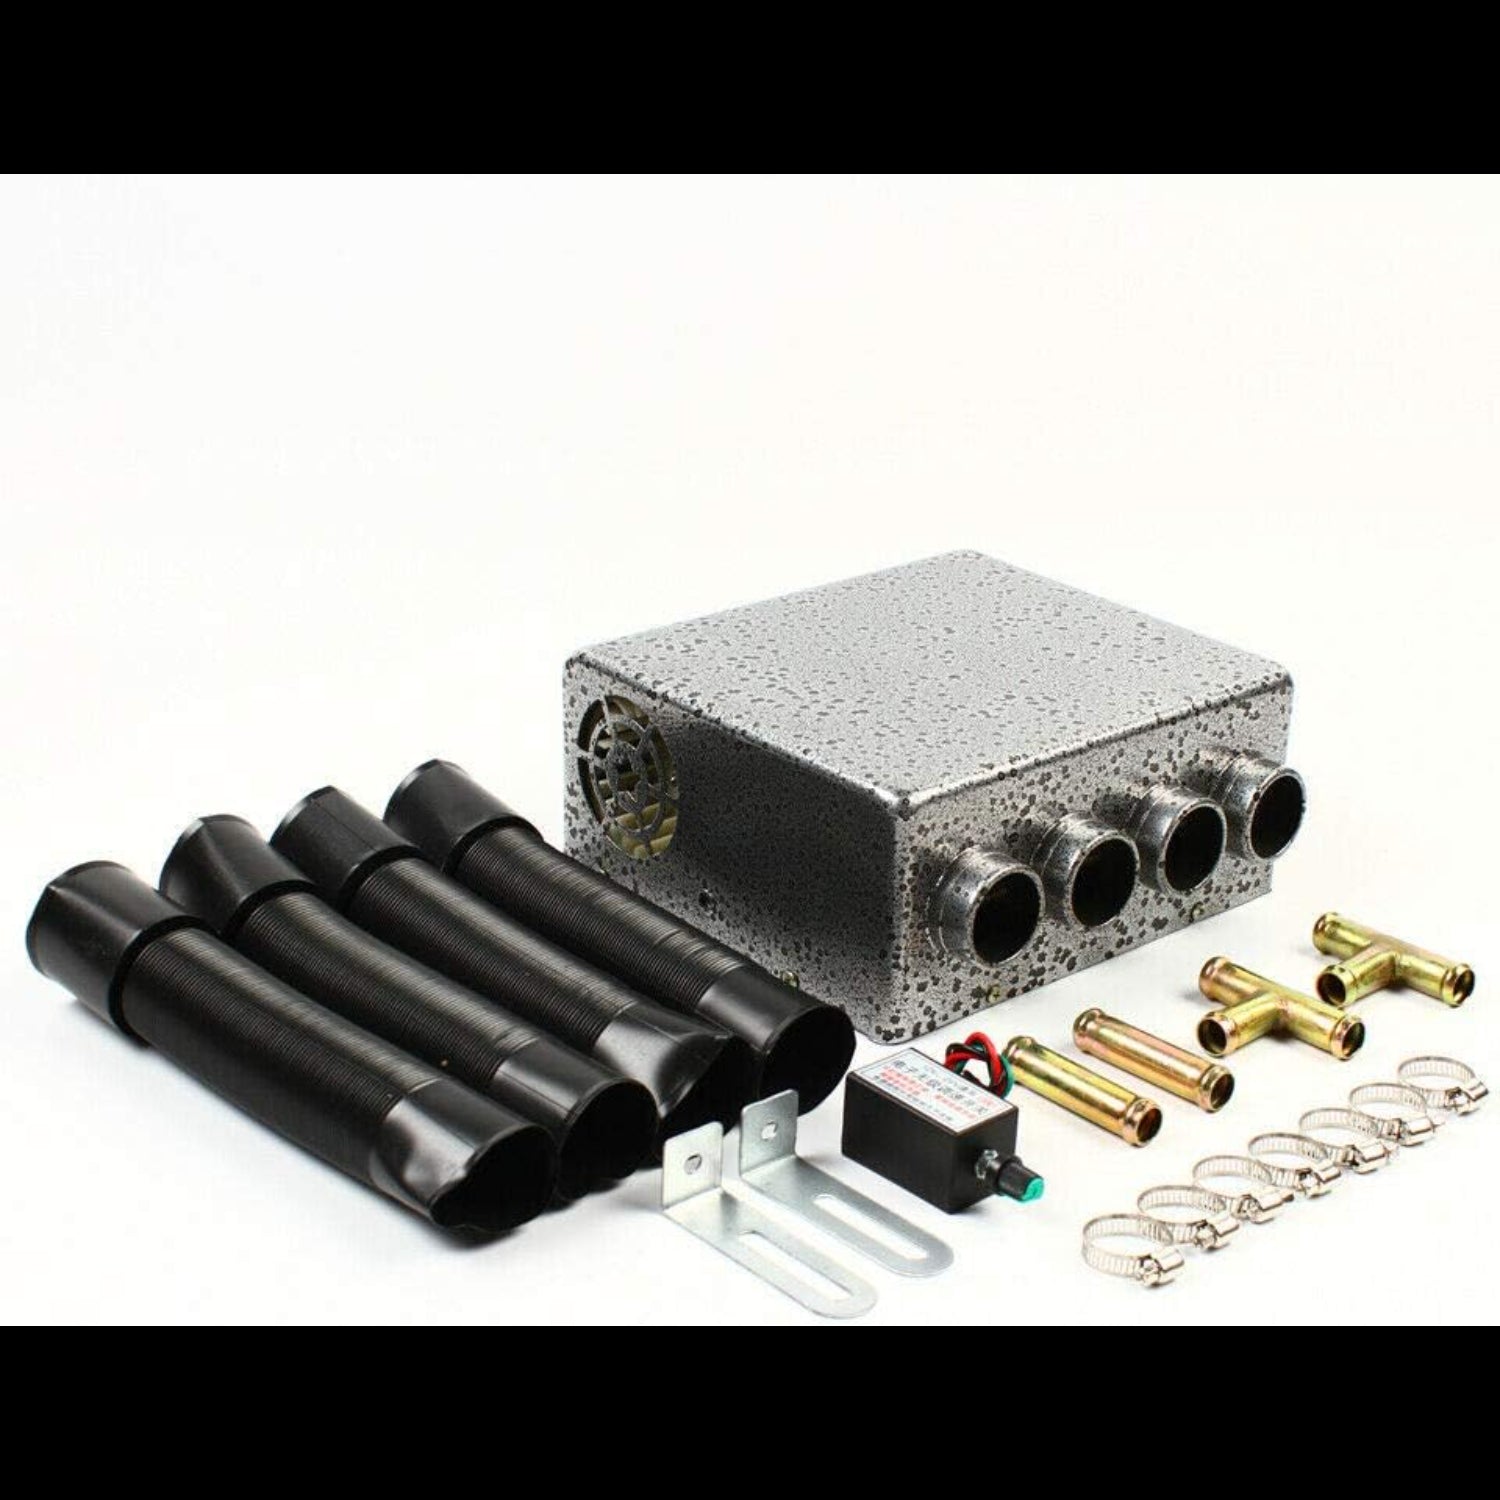 12V Universal Auxiliary Heater Underdash Heat with Speed Switch for Car or Truck Minivans Excavators Harvesters 4 ports